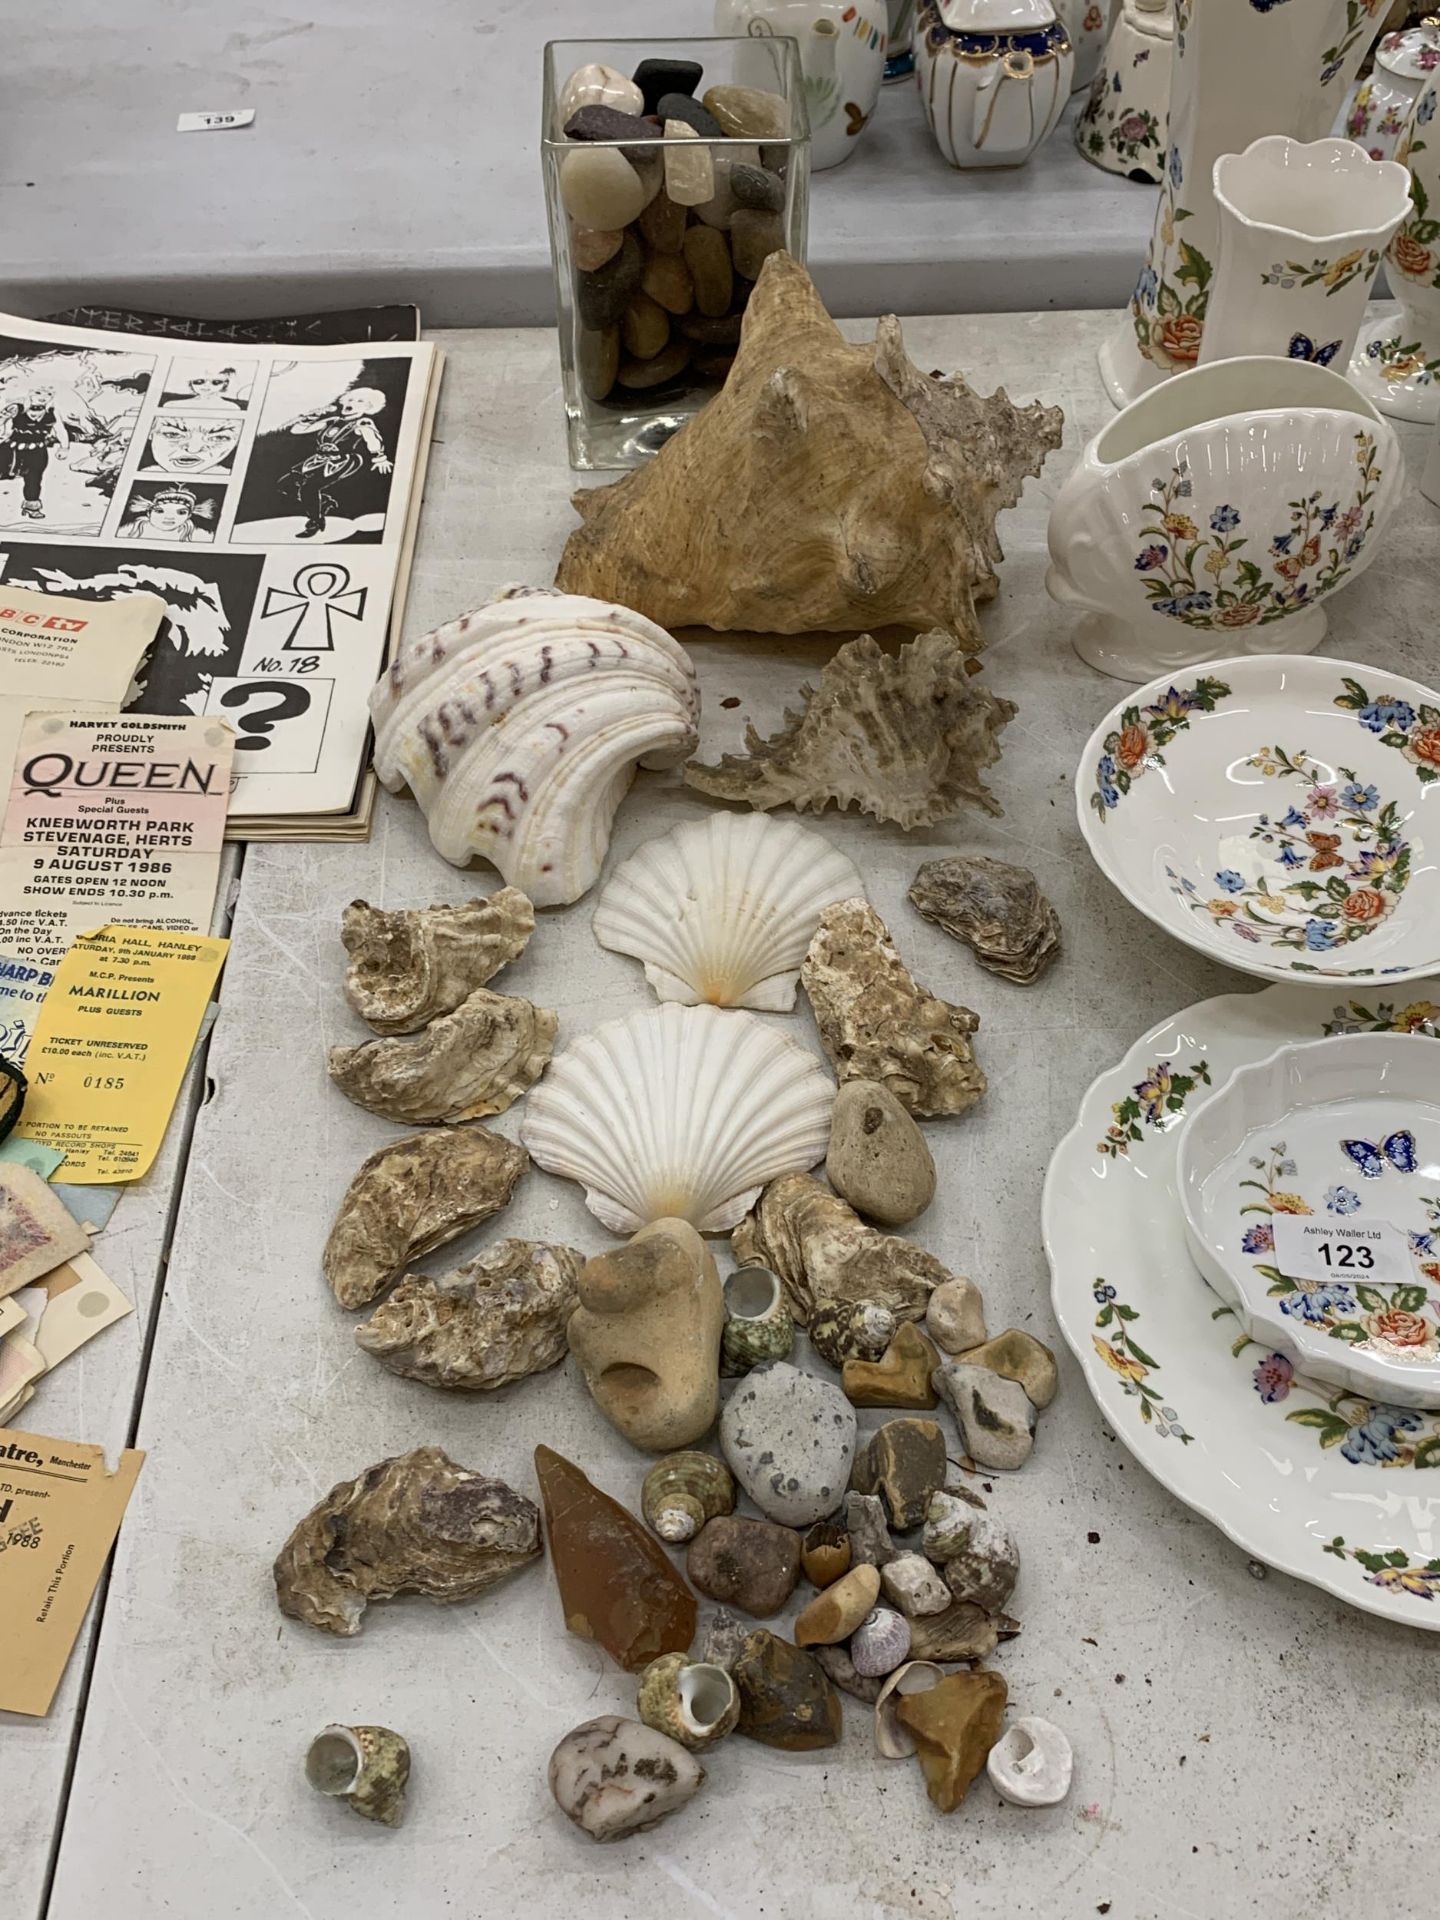 A COLLECTION OF SHELLS AND PEBBLES TO INCLUDE WHITE SCALLOPS, LARGE CONCH, OYSTER SHELLS, ETC.,